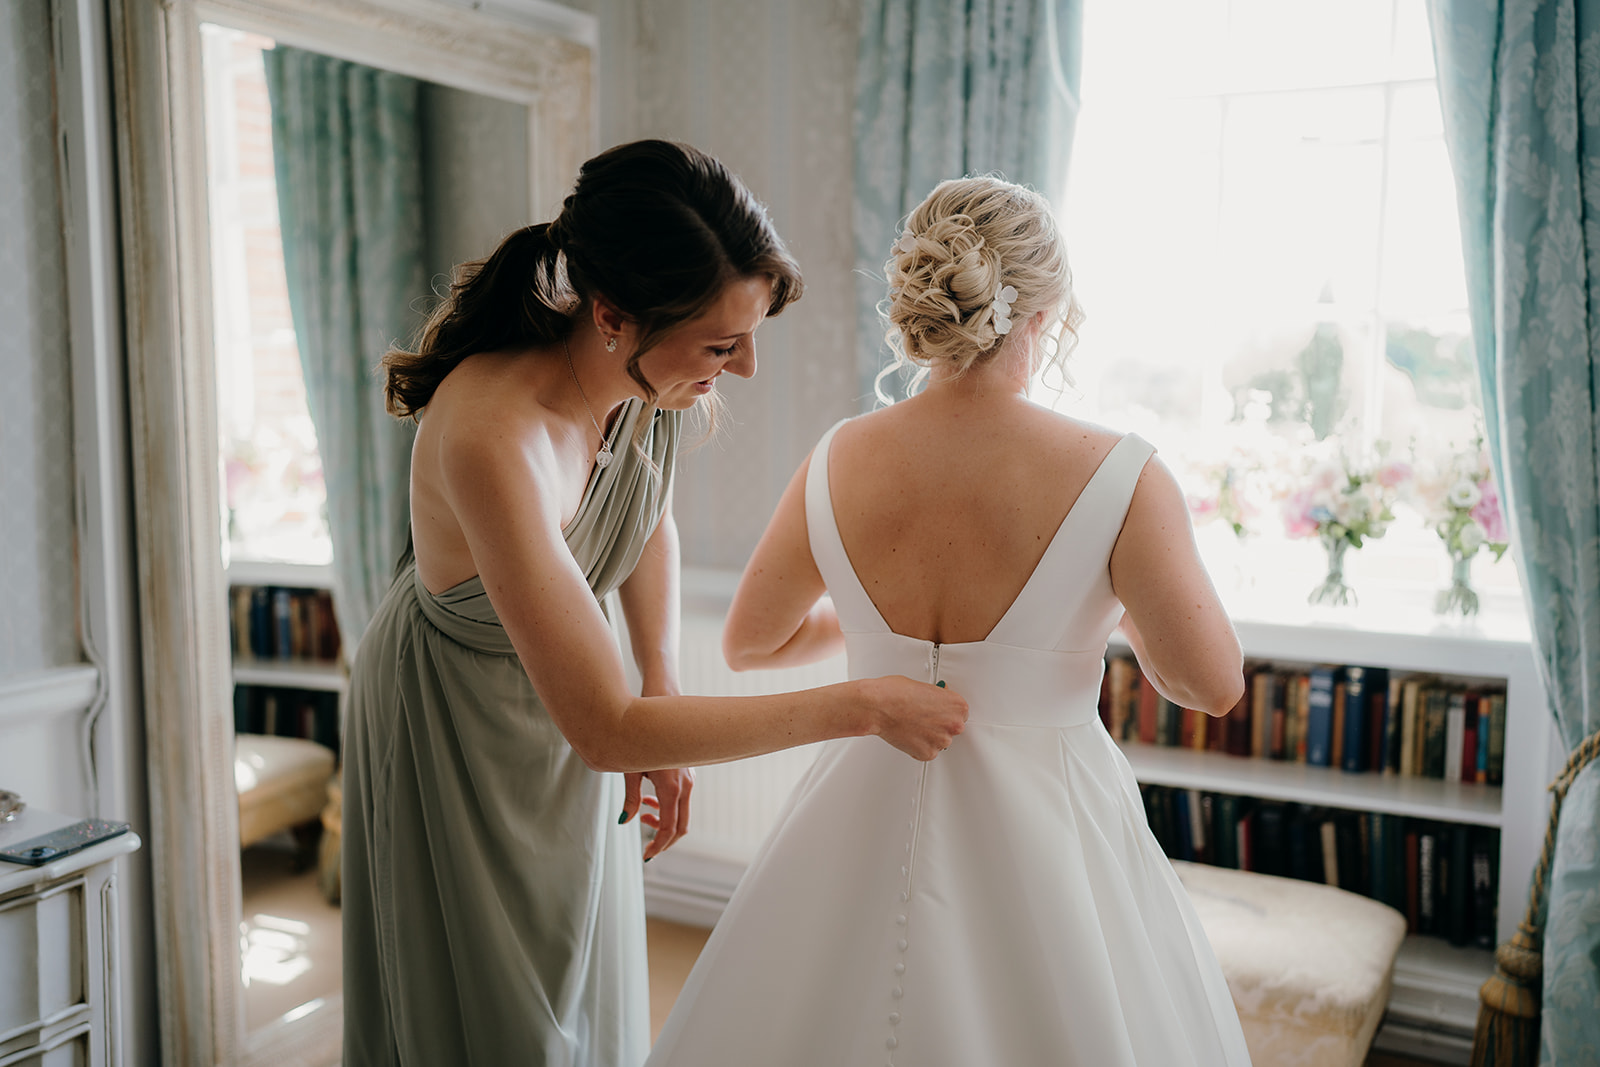 Bride having her dress buttoned by the maid of honour